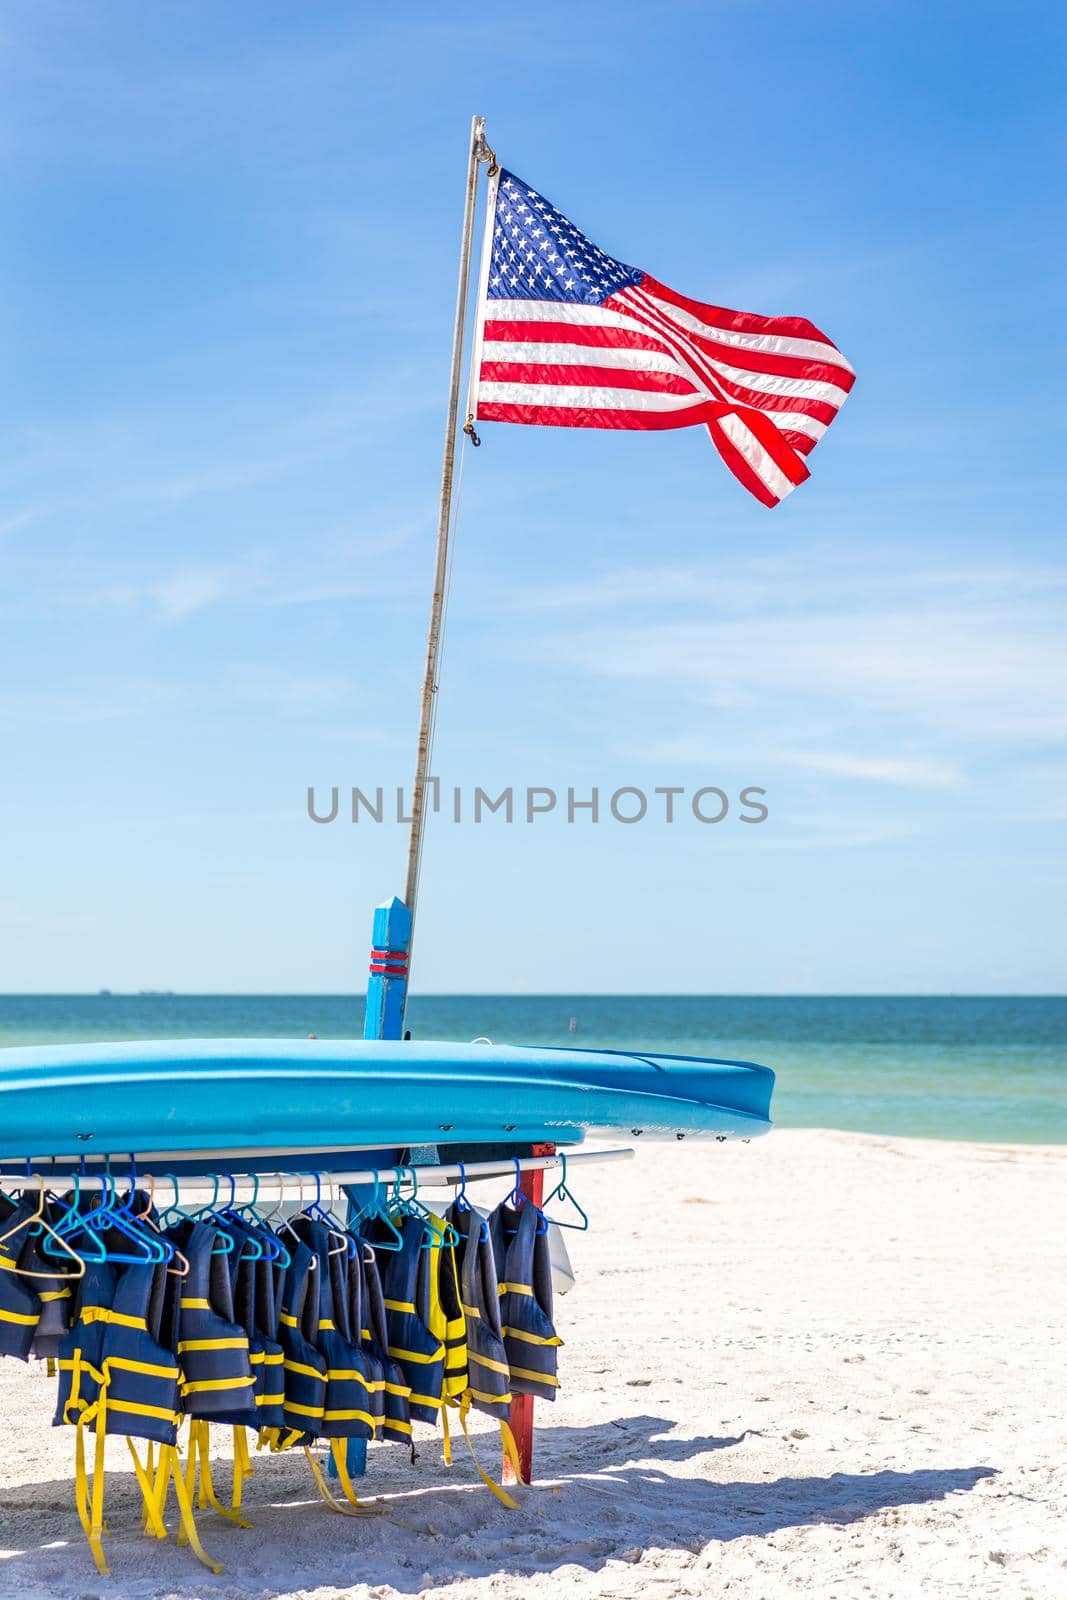 Life jackets and boats on St.Pete beach in Florida